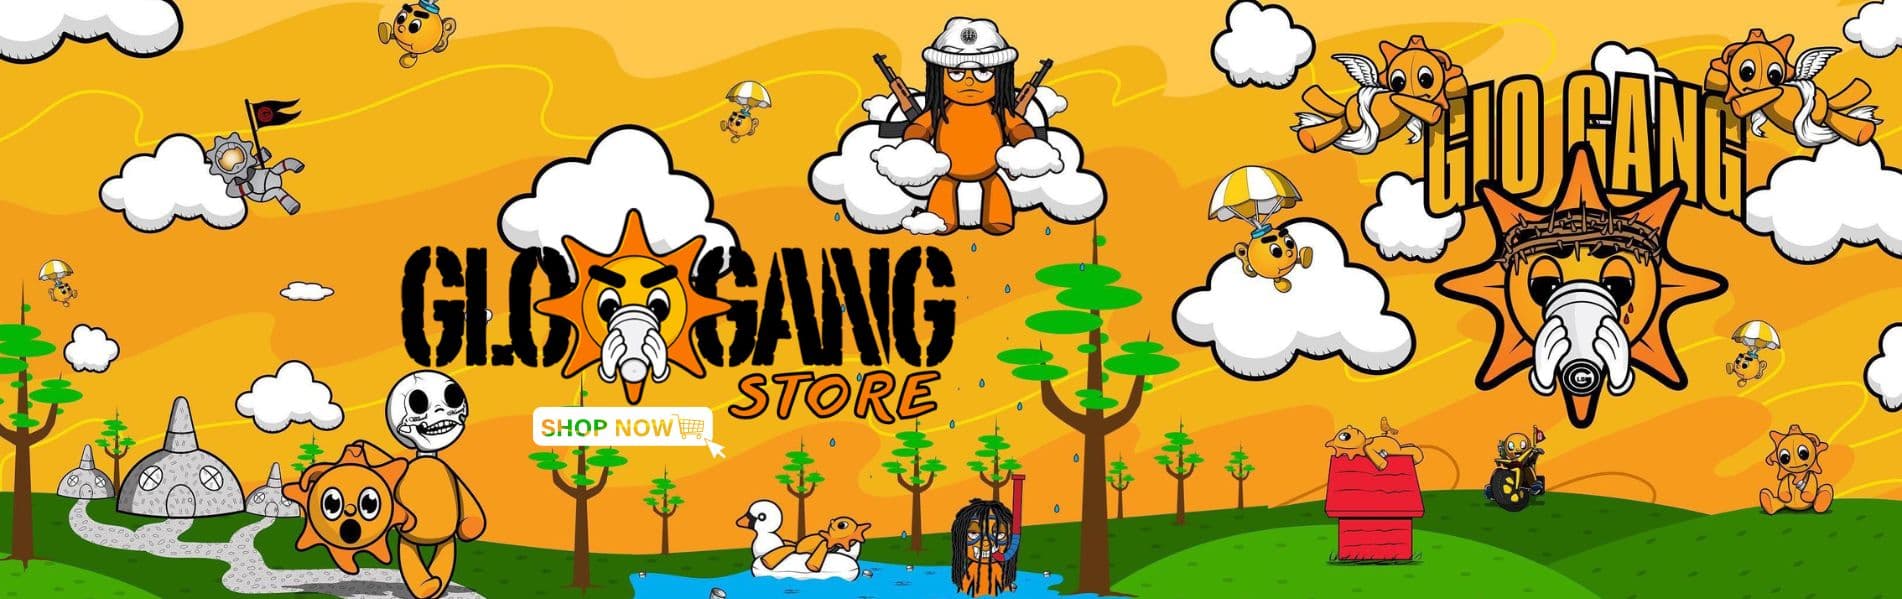 Glo Gang Store Banner 1 - Glo Gang Store